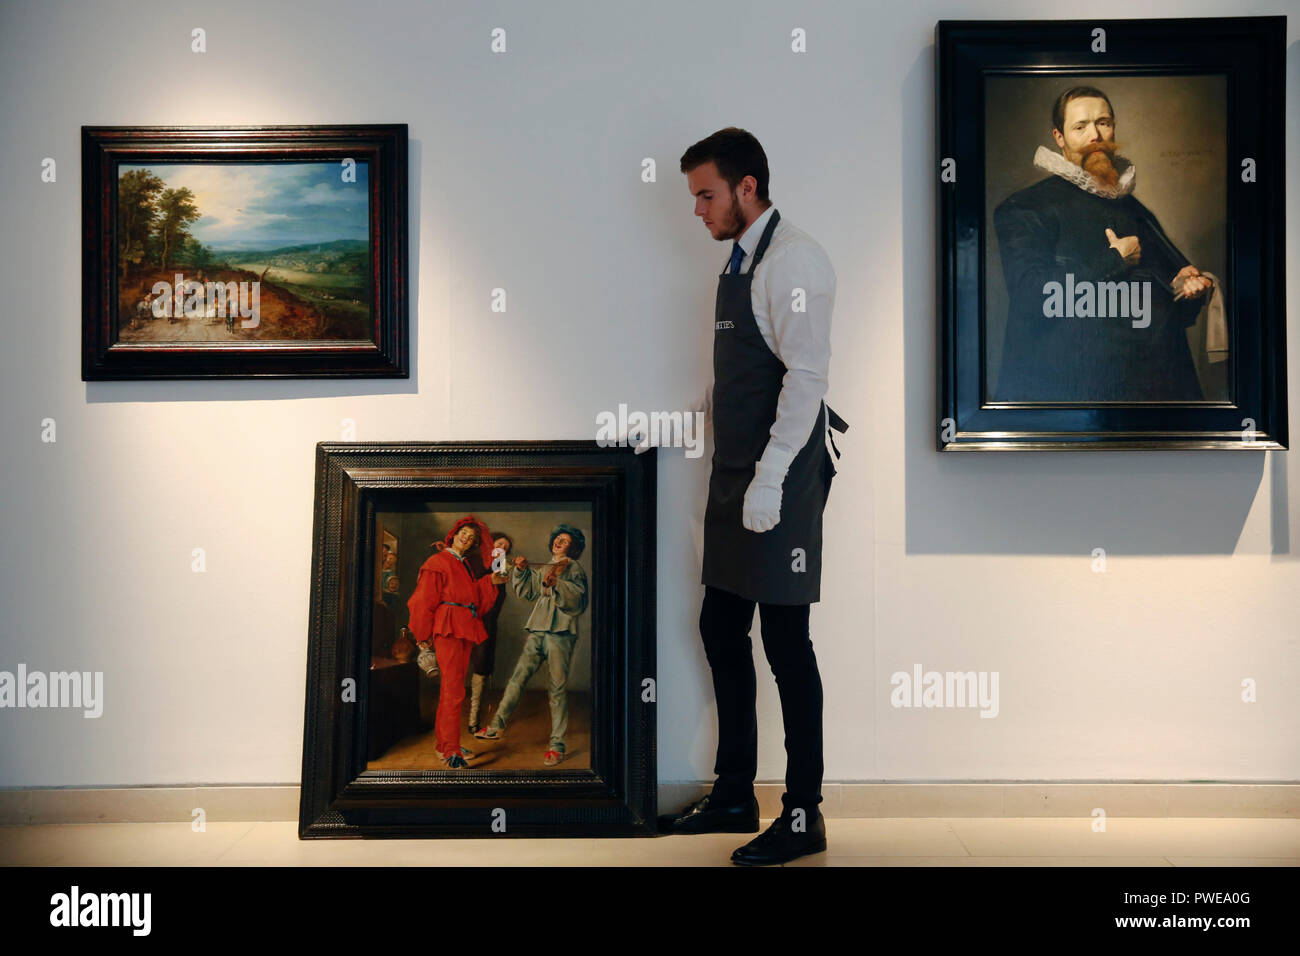 London, UK, 16th Oct 2018. A Christie's art handler stands with artworks by Dutch masters, (L-R) Jan Breughel the Elder 's 'An extensive wooded landscapef'; Judith Leyster 's 'Merry Company'; Frans Hals 'Portrait of a Gentleman holding a pair of gloves' a at Christie's Auction House in London, UK, Tuesday October 16, 2017. The pieces are expected to achieve £5million, £2.5million and £12million ( one of a pair ) respectively when they come to auction as part of the Albada Jelgersma Collection sale during Christie's Classic Week in December. Photograph : Credit: Luke MacGregor/Alamy Live News Stock Photo